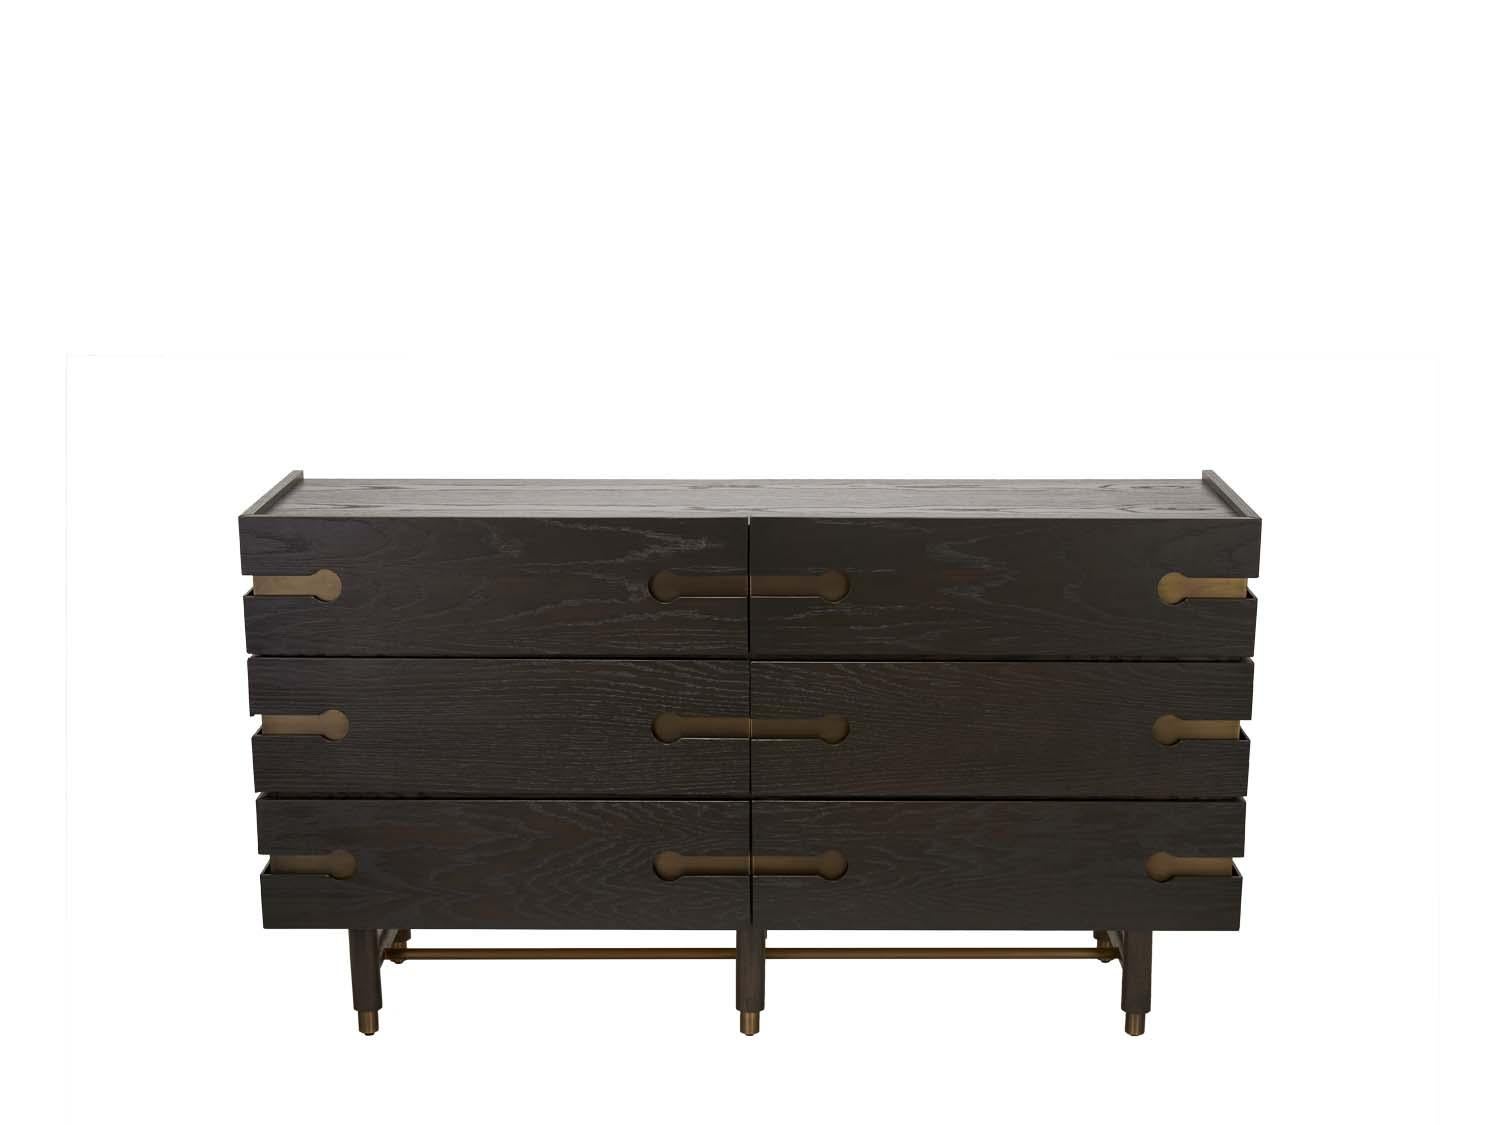 The 6-drawer Niguel dresser features 6 drawers, brass cap feet, and brass inlaid details.

The Lawson-Fenning Collection is designed and handmade in Los Angeles, California. Reach out to discover what options are currently in stock.